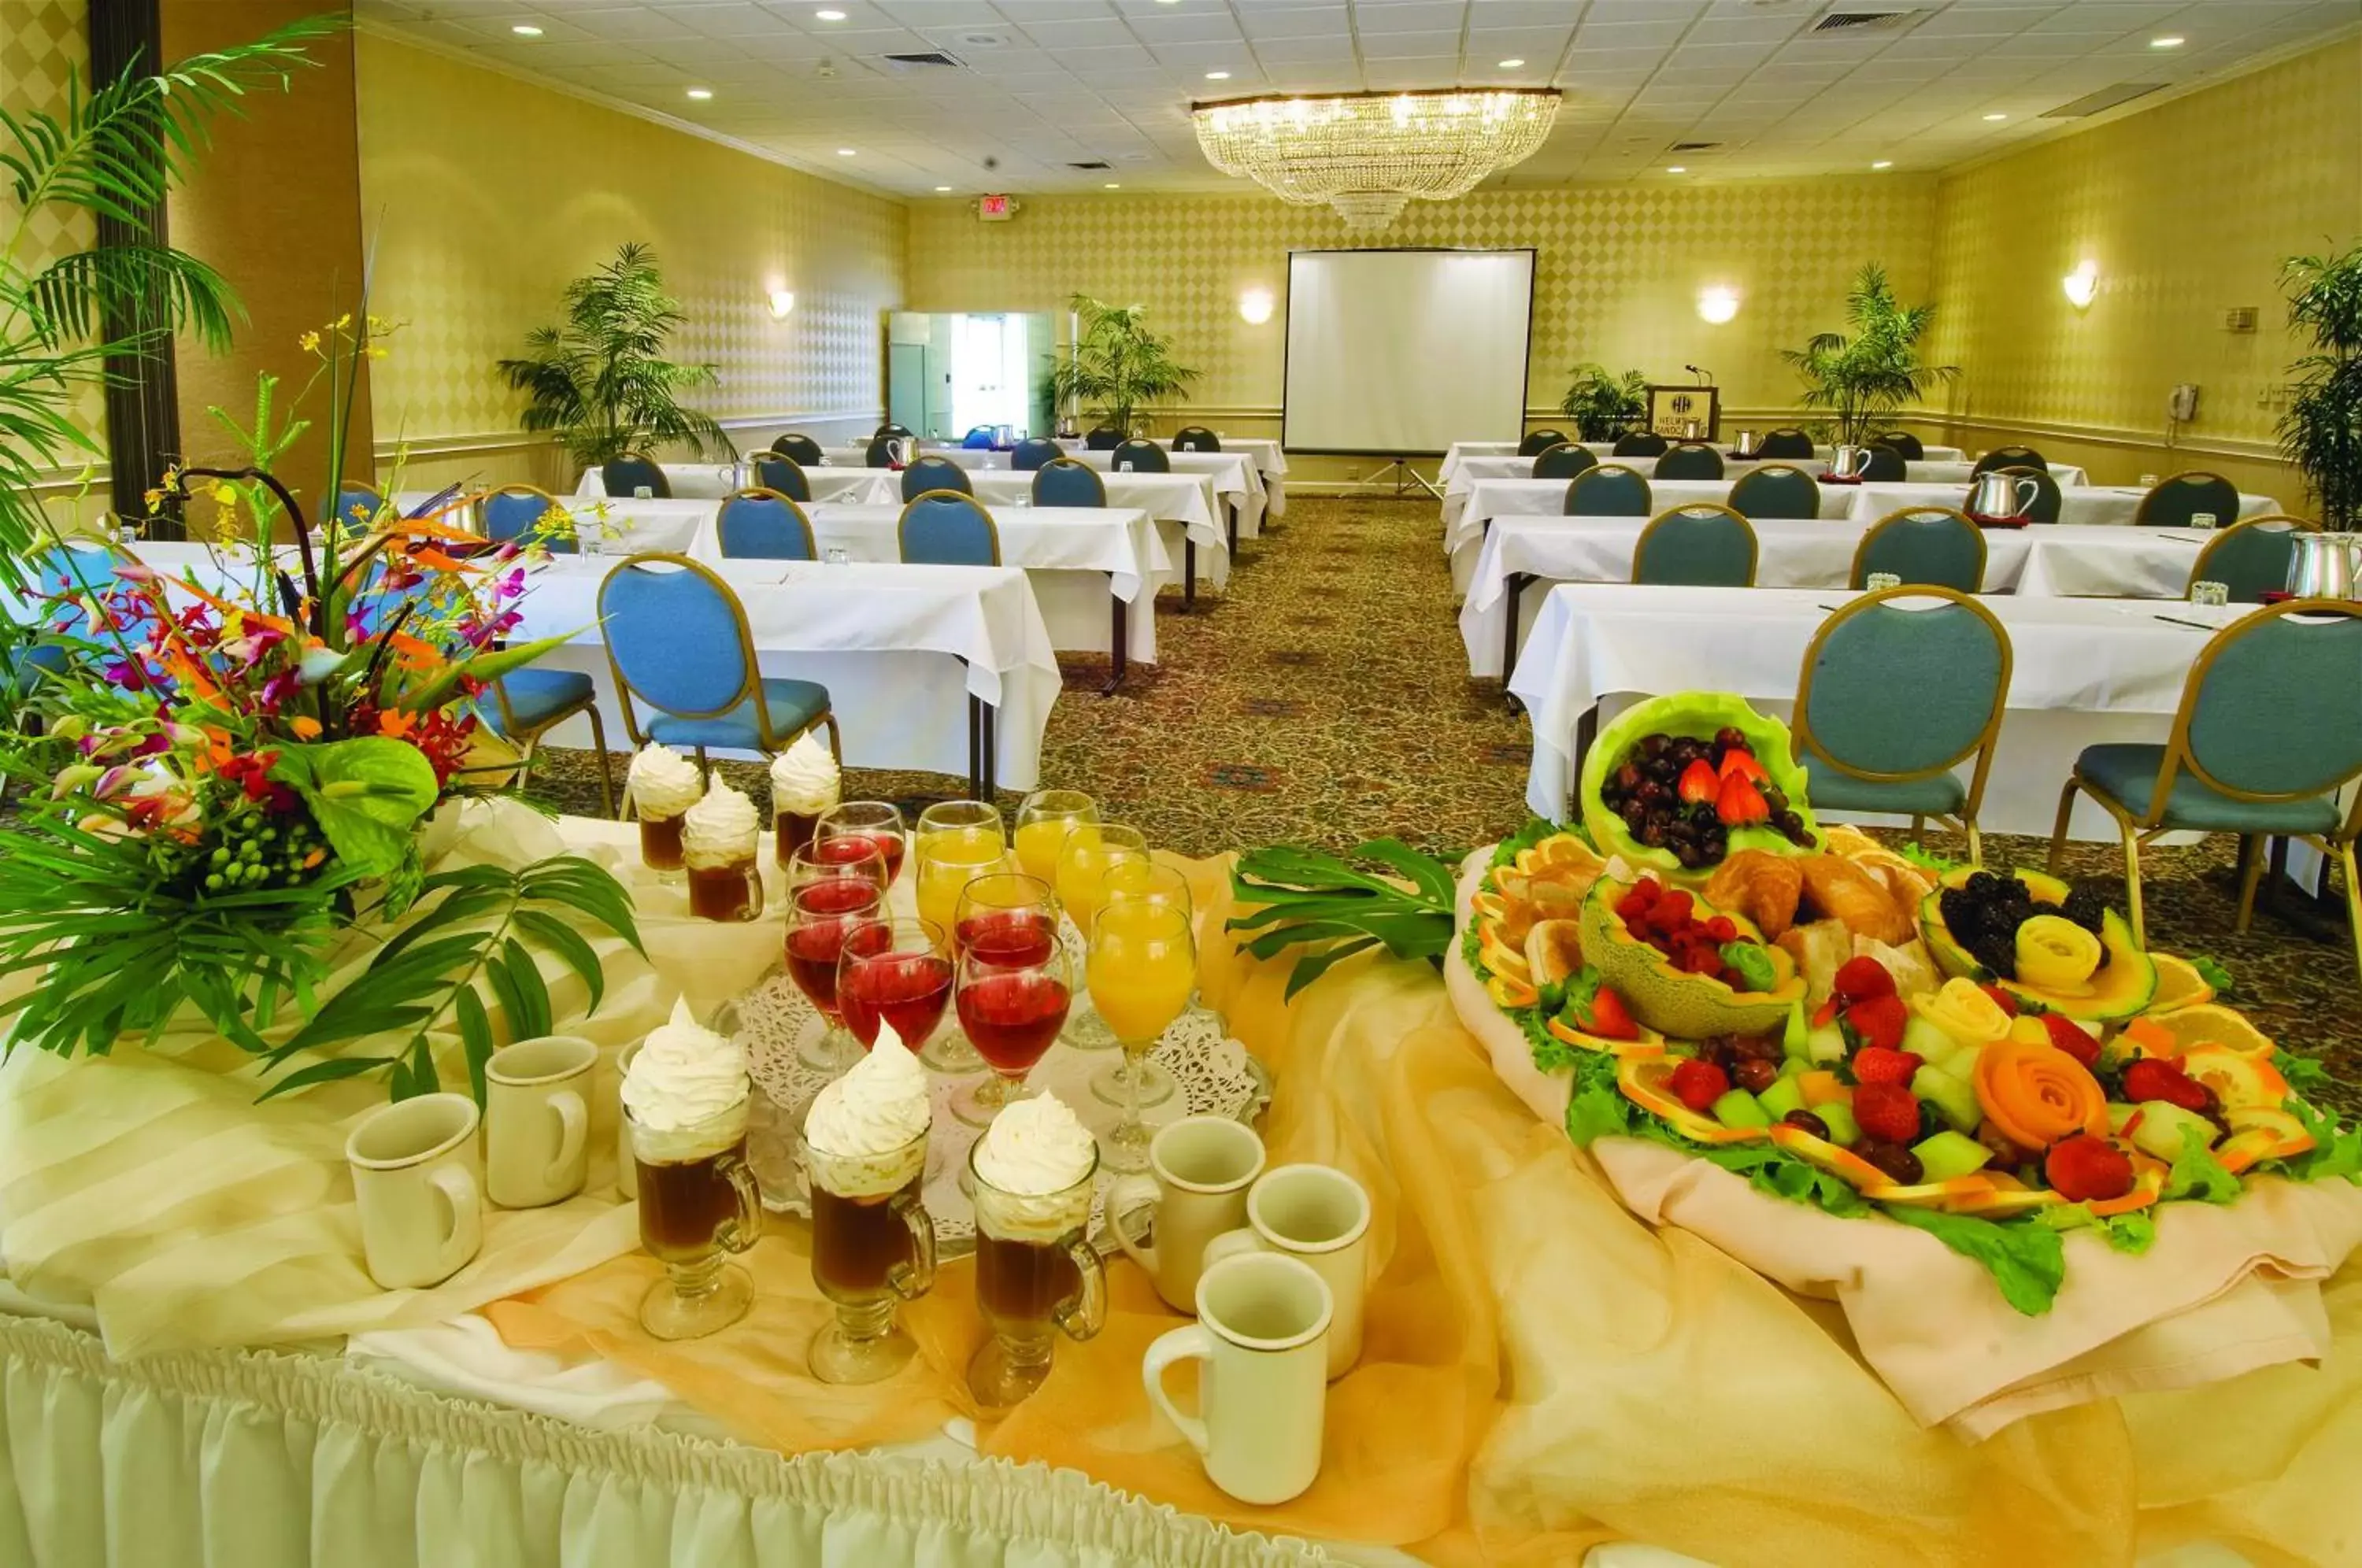 Business facilities in Sandcastle Resort at Lido Beach